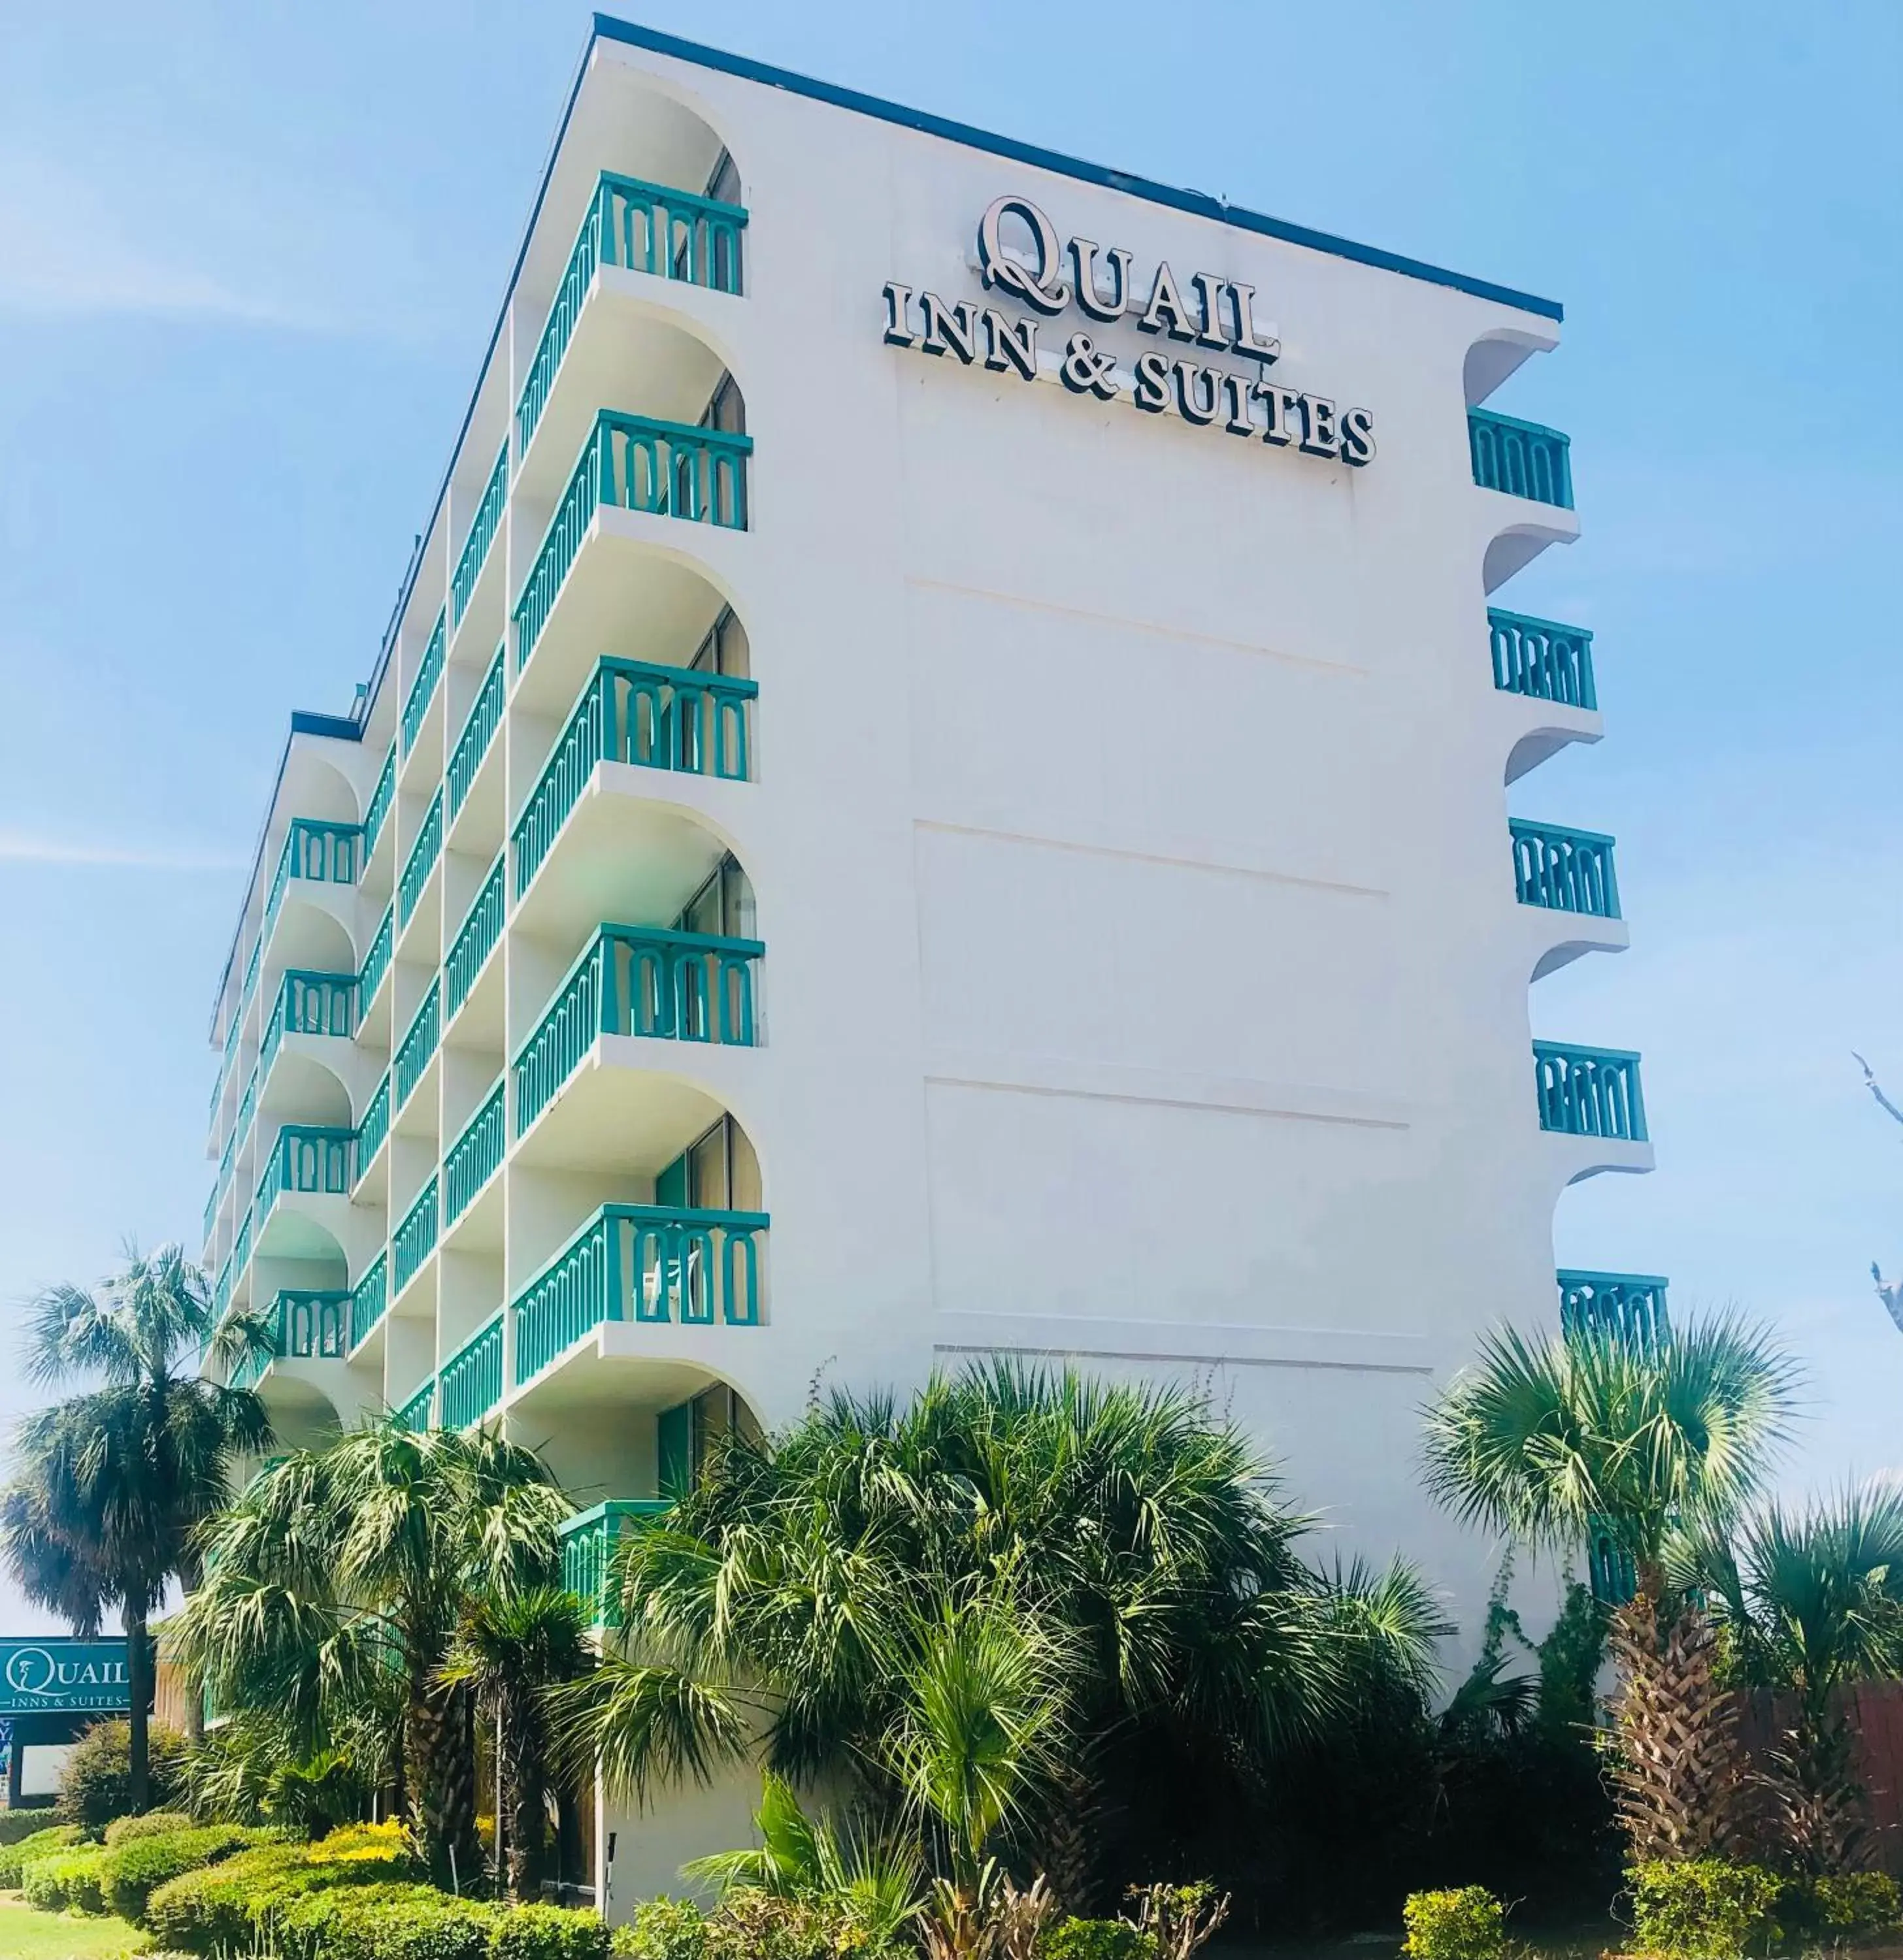 Property Building in Quail Inn and Suites - Myrtle Beach